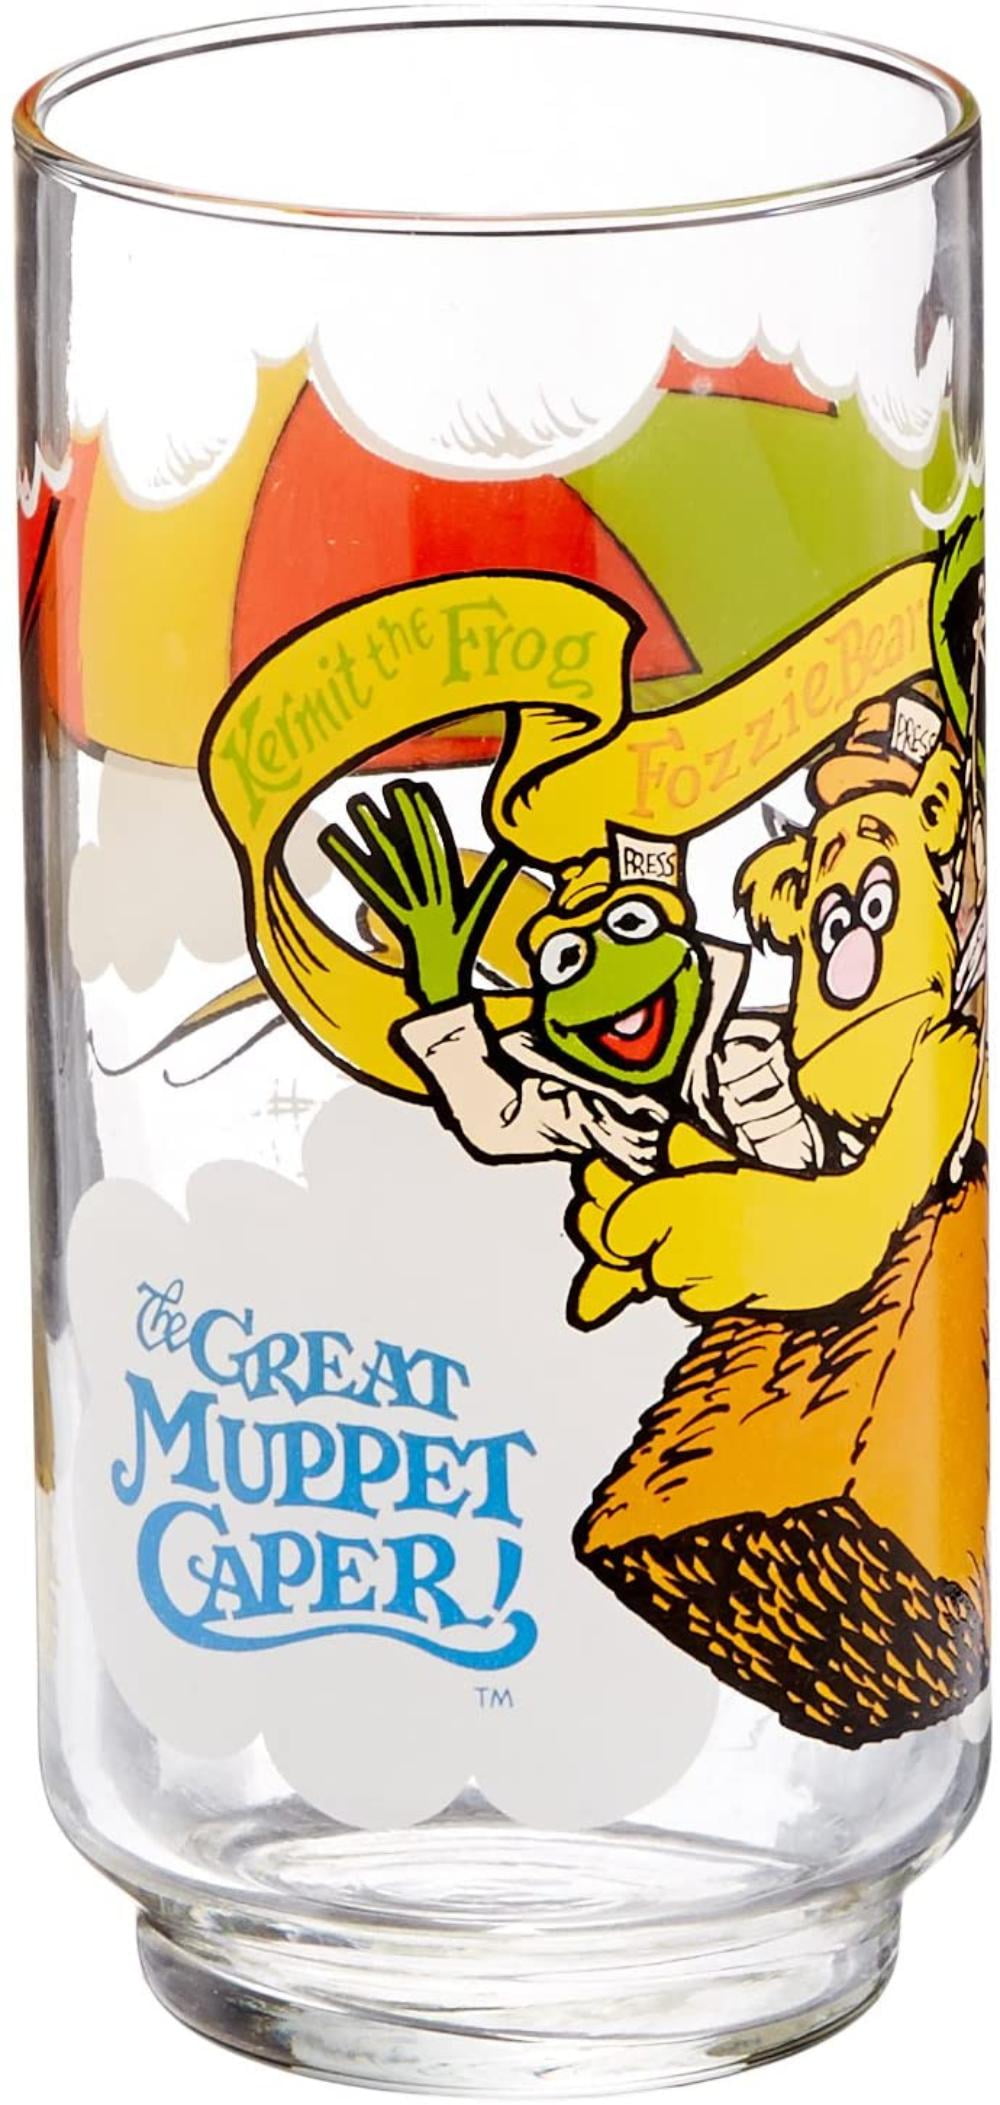 Details about   McDonalds The Great Muppet Caper 1981 Set of 4 Kermit the Frog Glasses 